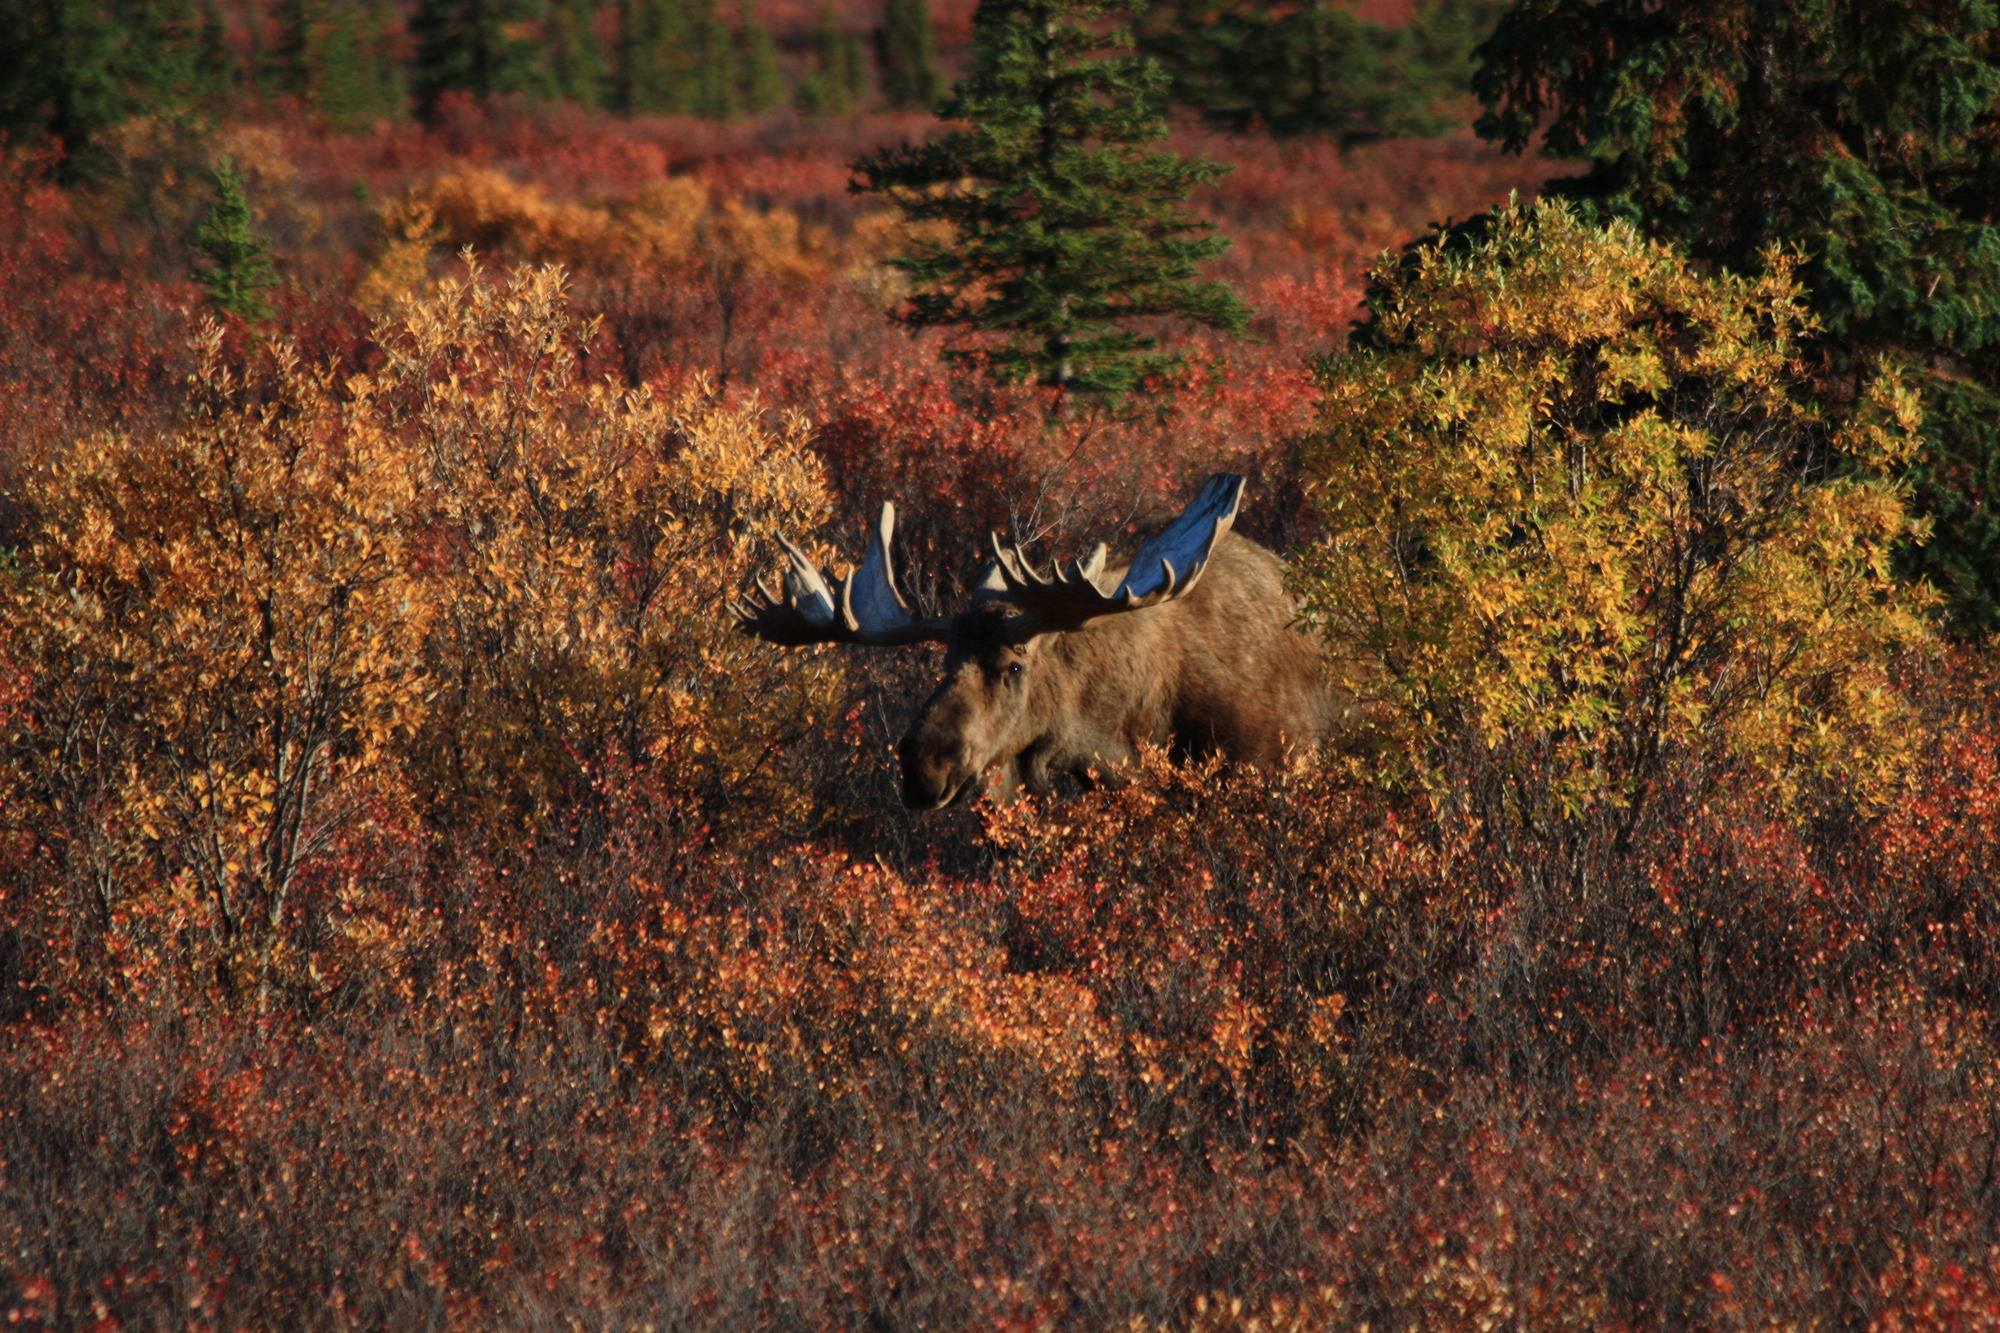 male moose with large antlers standing amid tall bushes on the edge of a forest